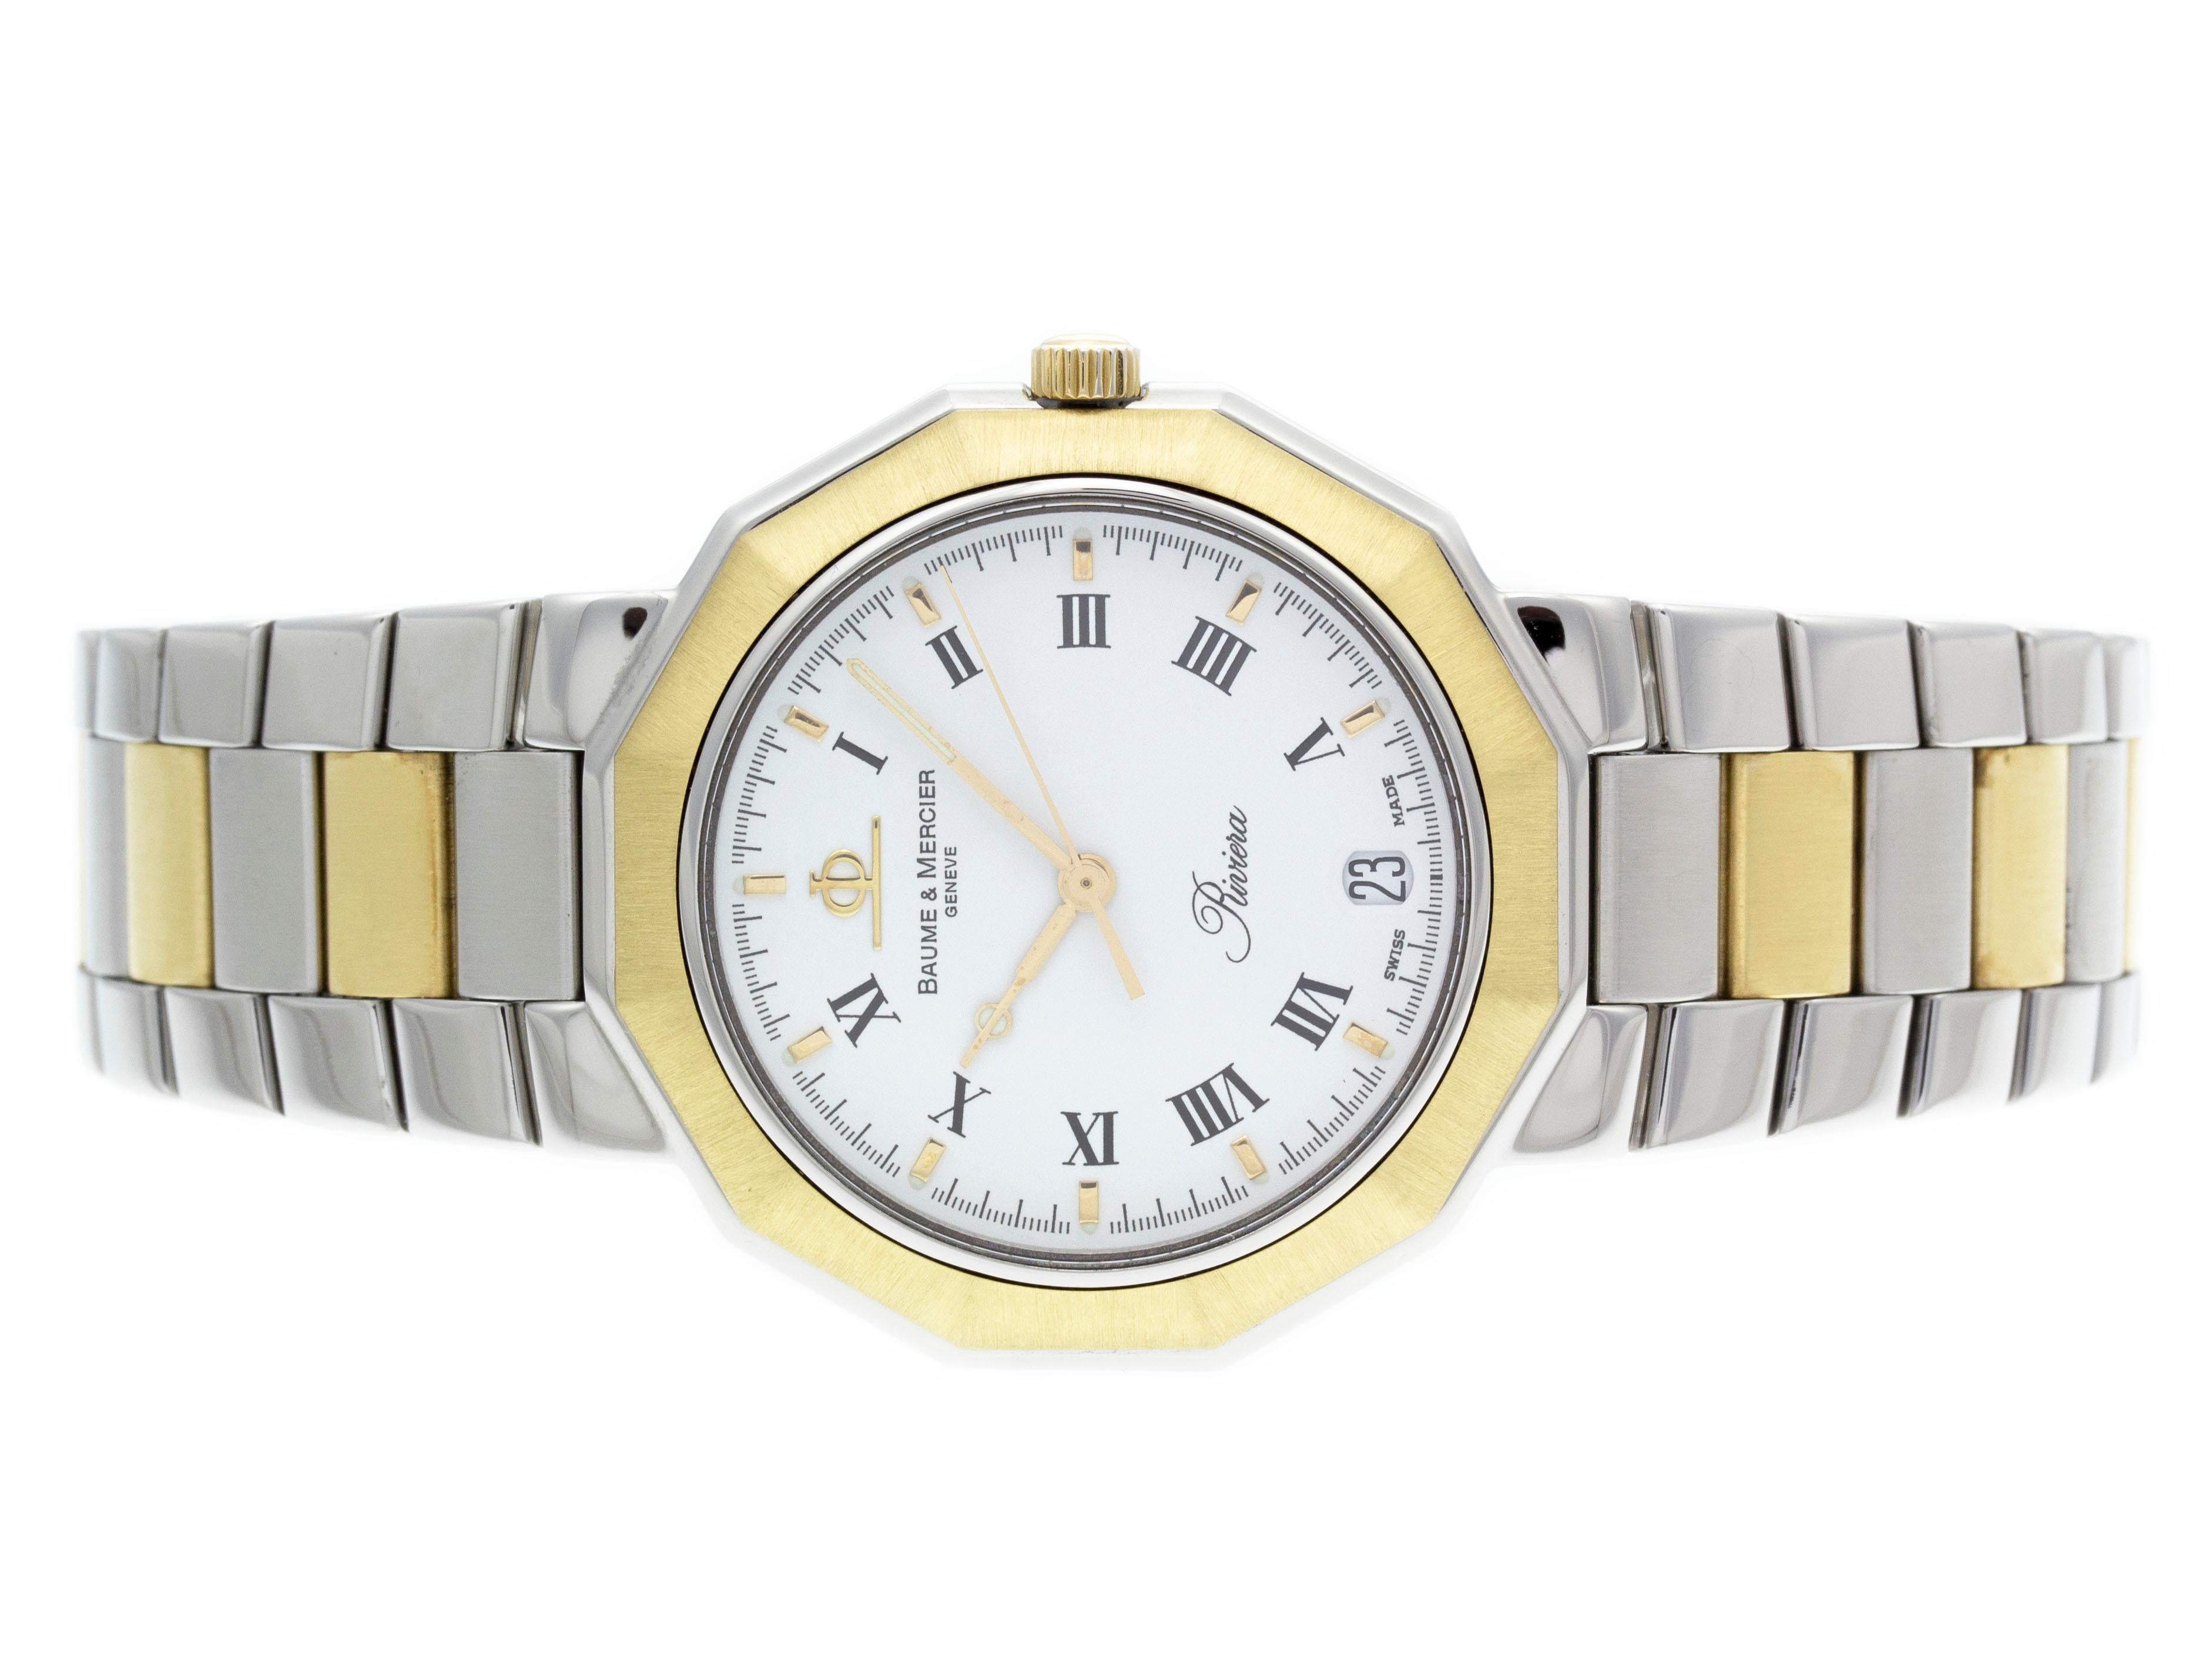 Stainless steel & 18k yellow gold Baume & Mercier quartz watch with a 36mm case, white dial, and two tone bracelet with folding clasp. Features include hours, minutes, seconds, and date. Comes with a Deluxe Gift Box and 2 Year Store